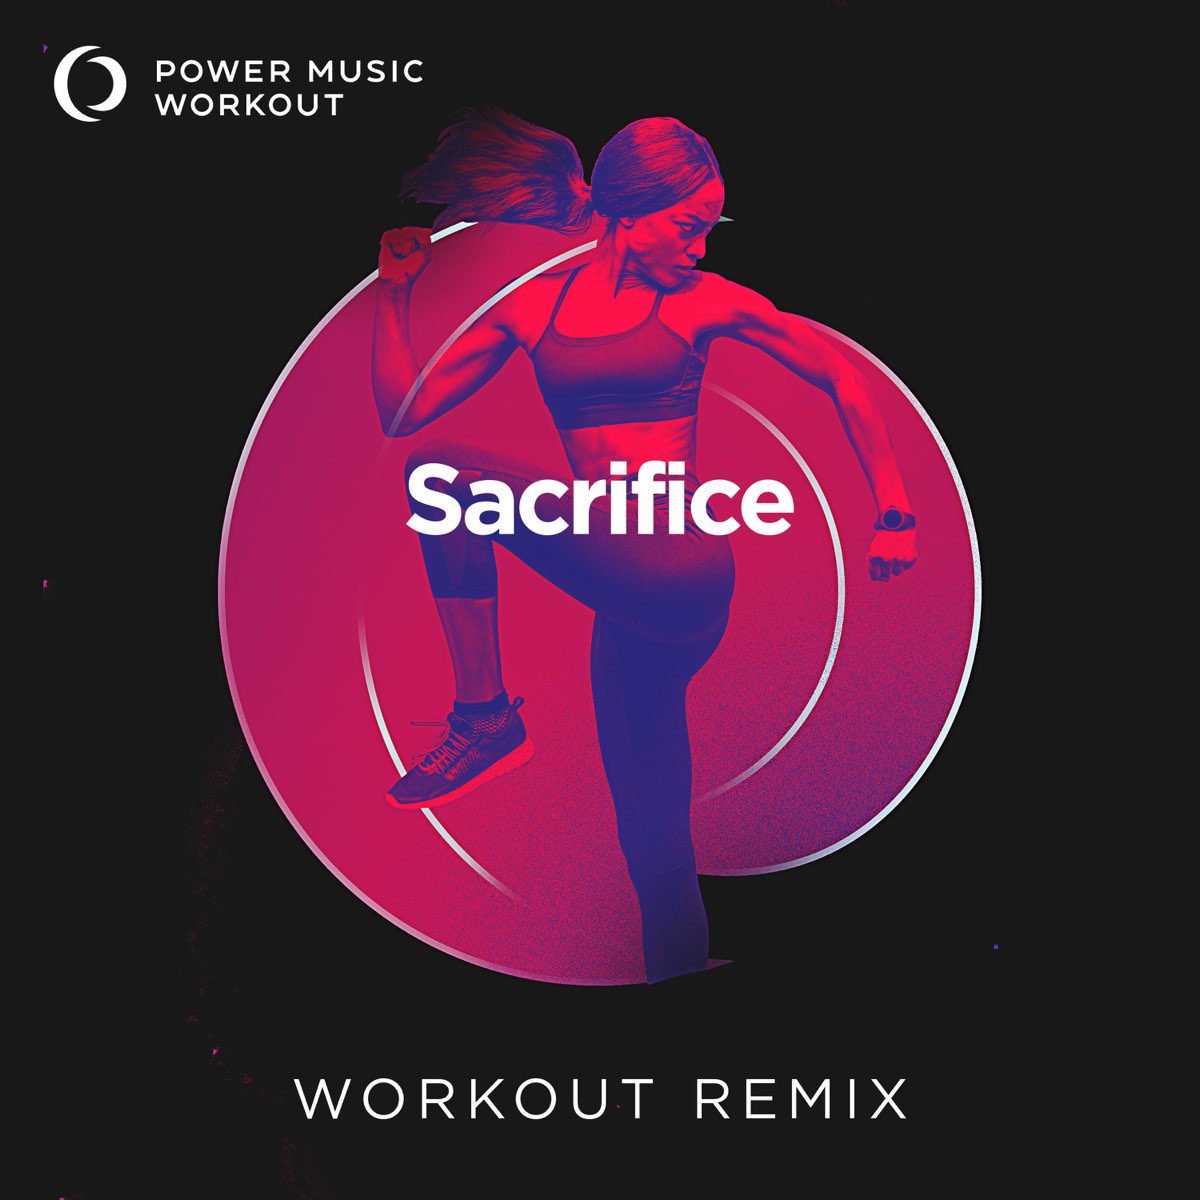 30 Minute Workout Music Mix 2000 for push your ABS